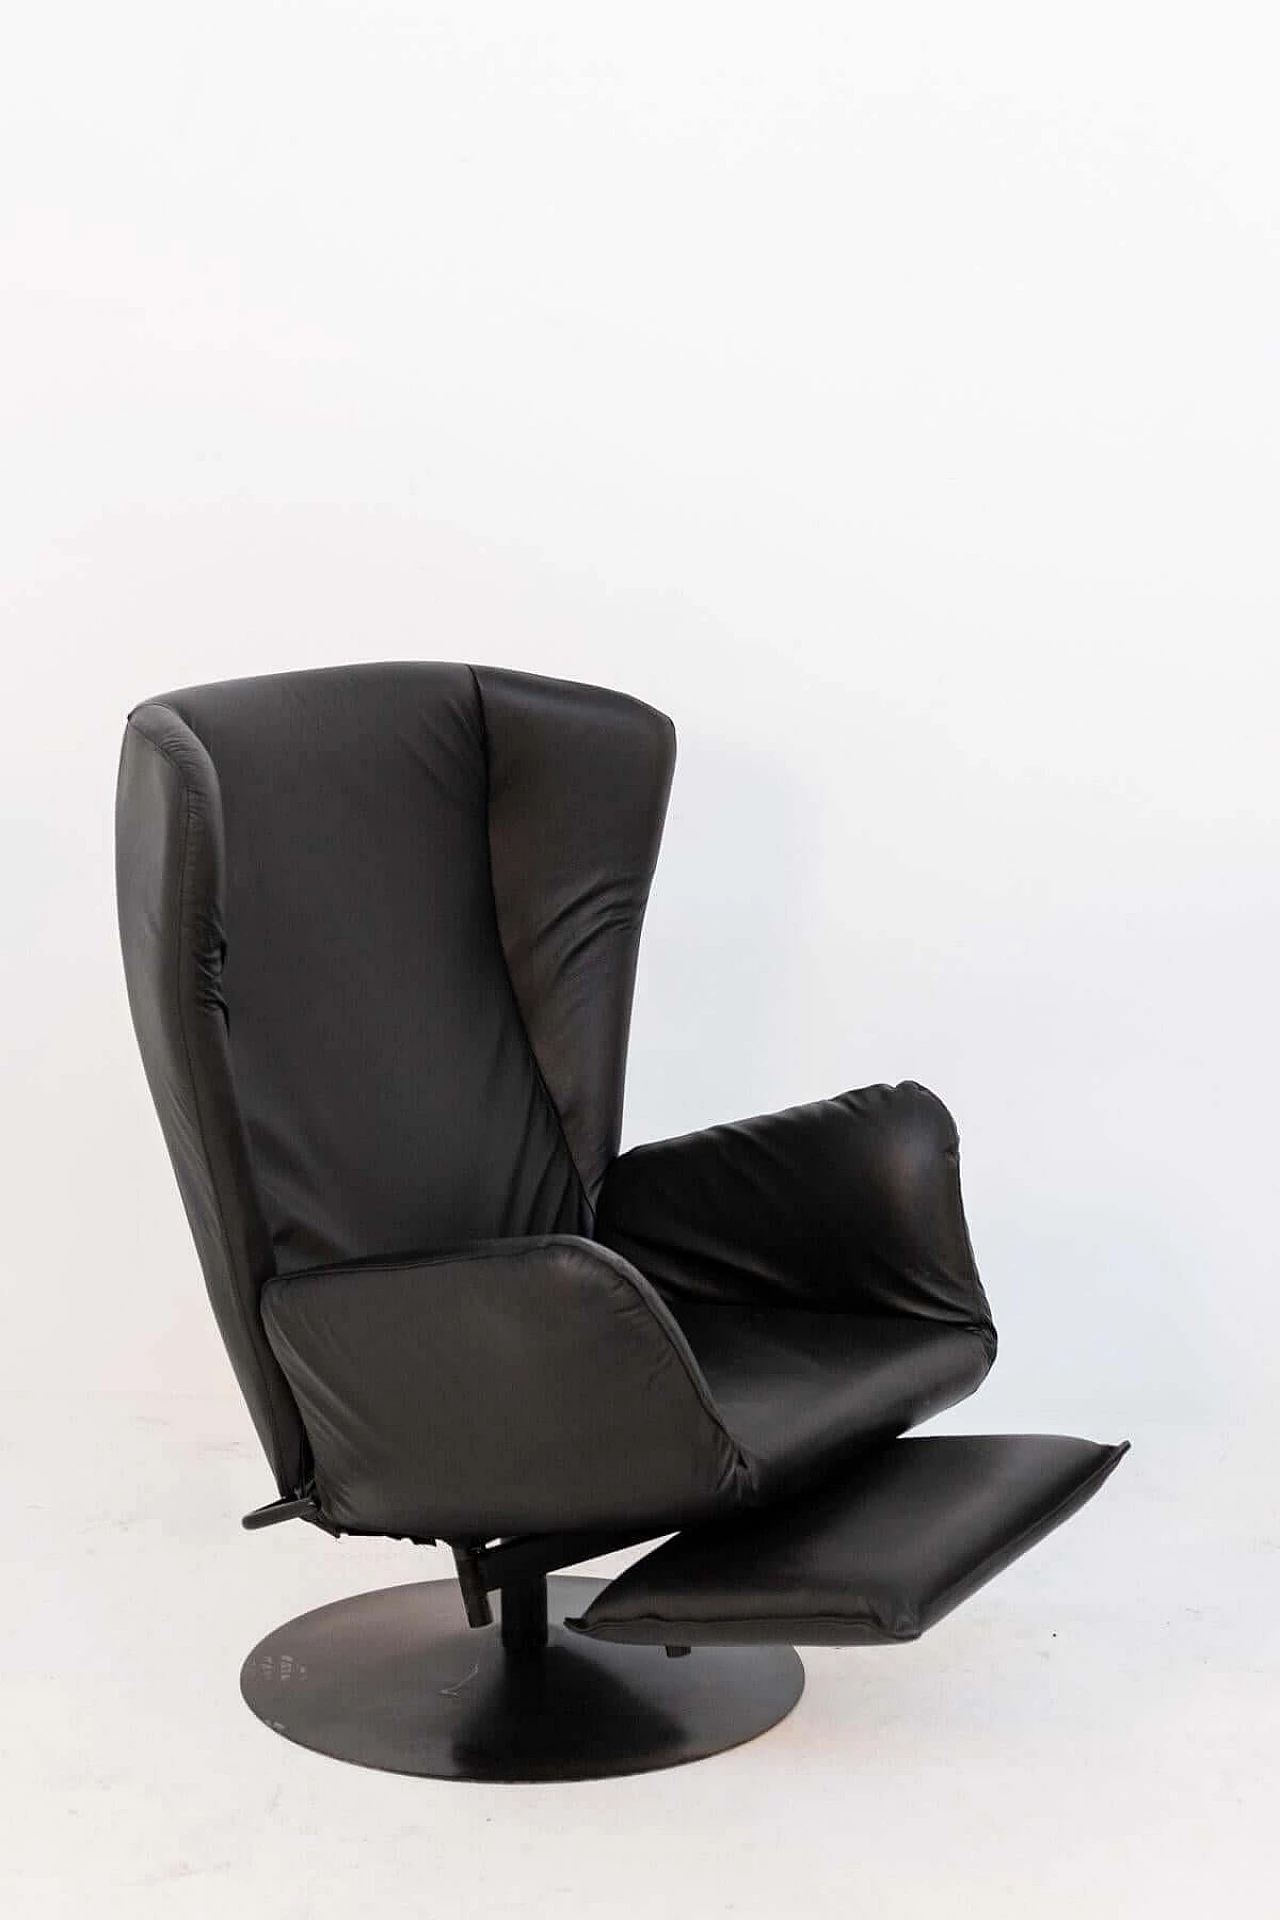 Pair of black leather armchairs with footrest cushion, 1970s 1405535